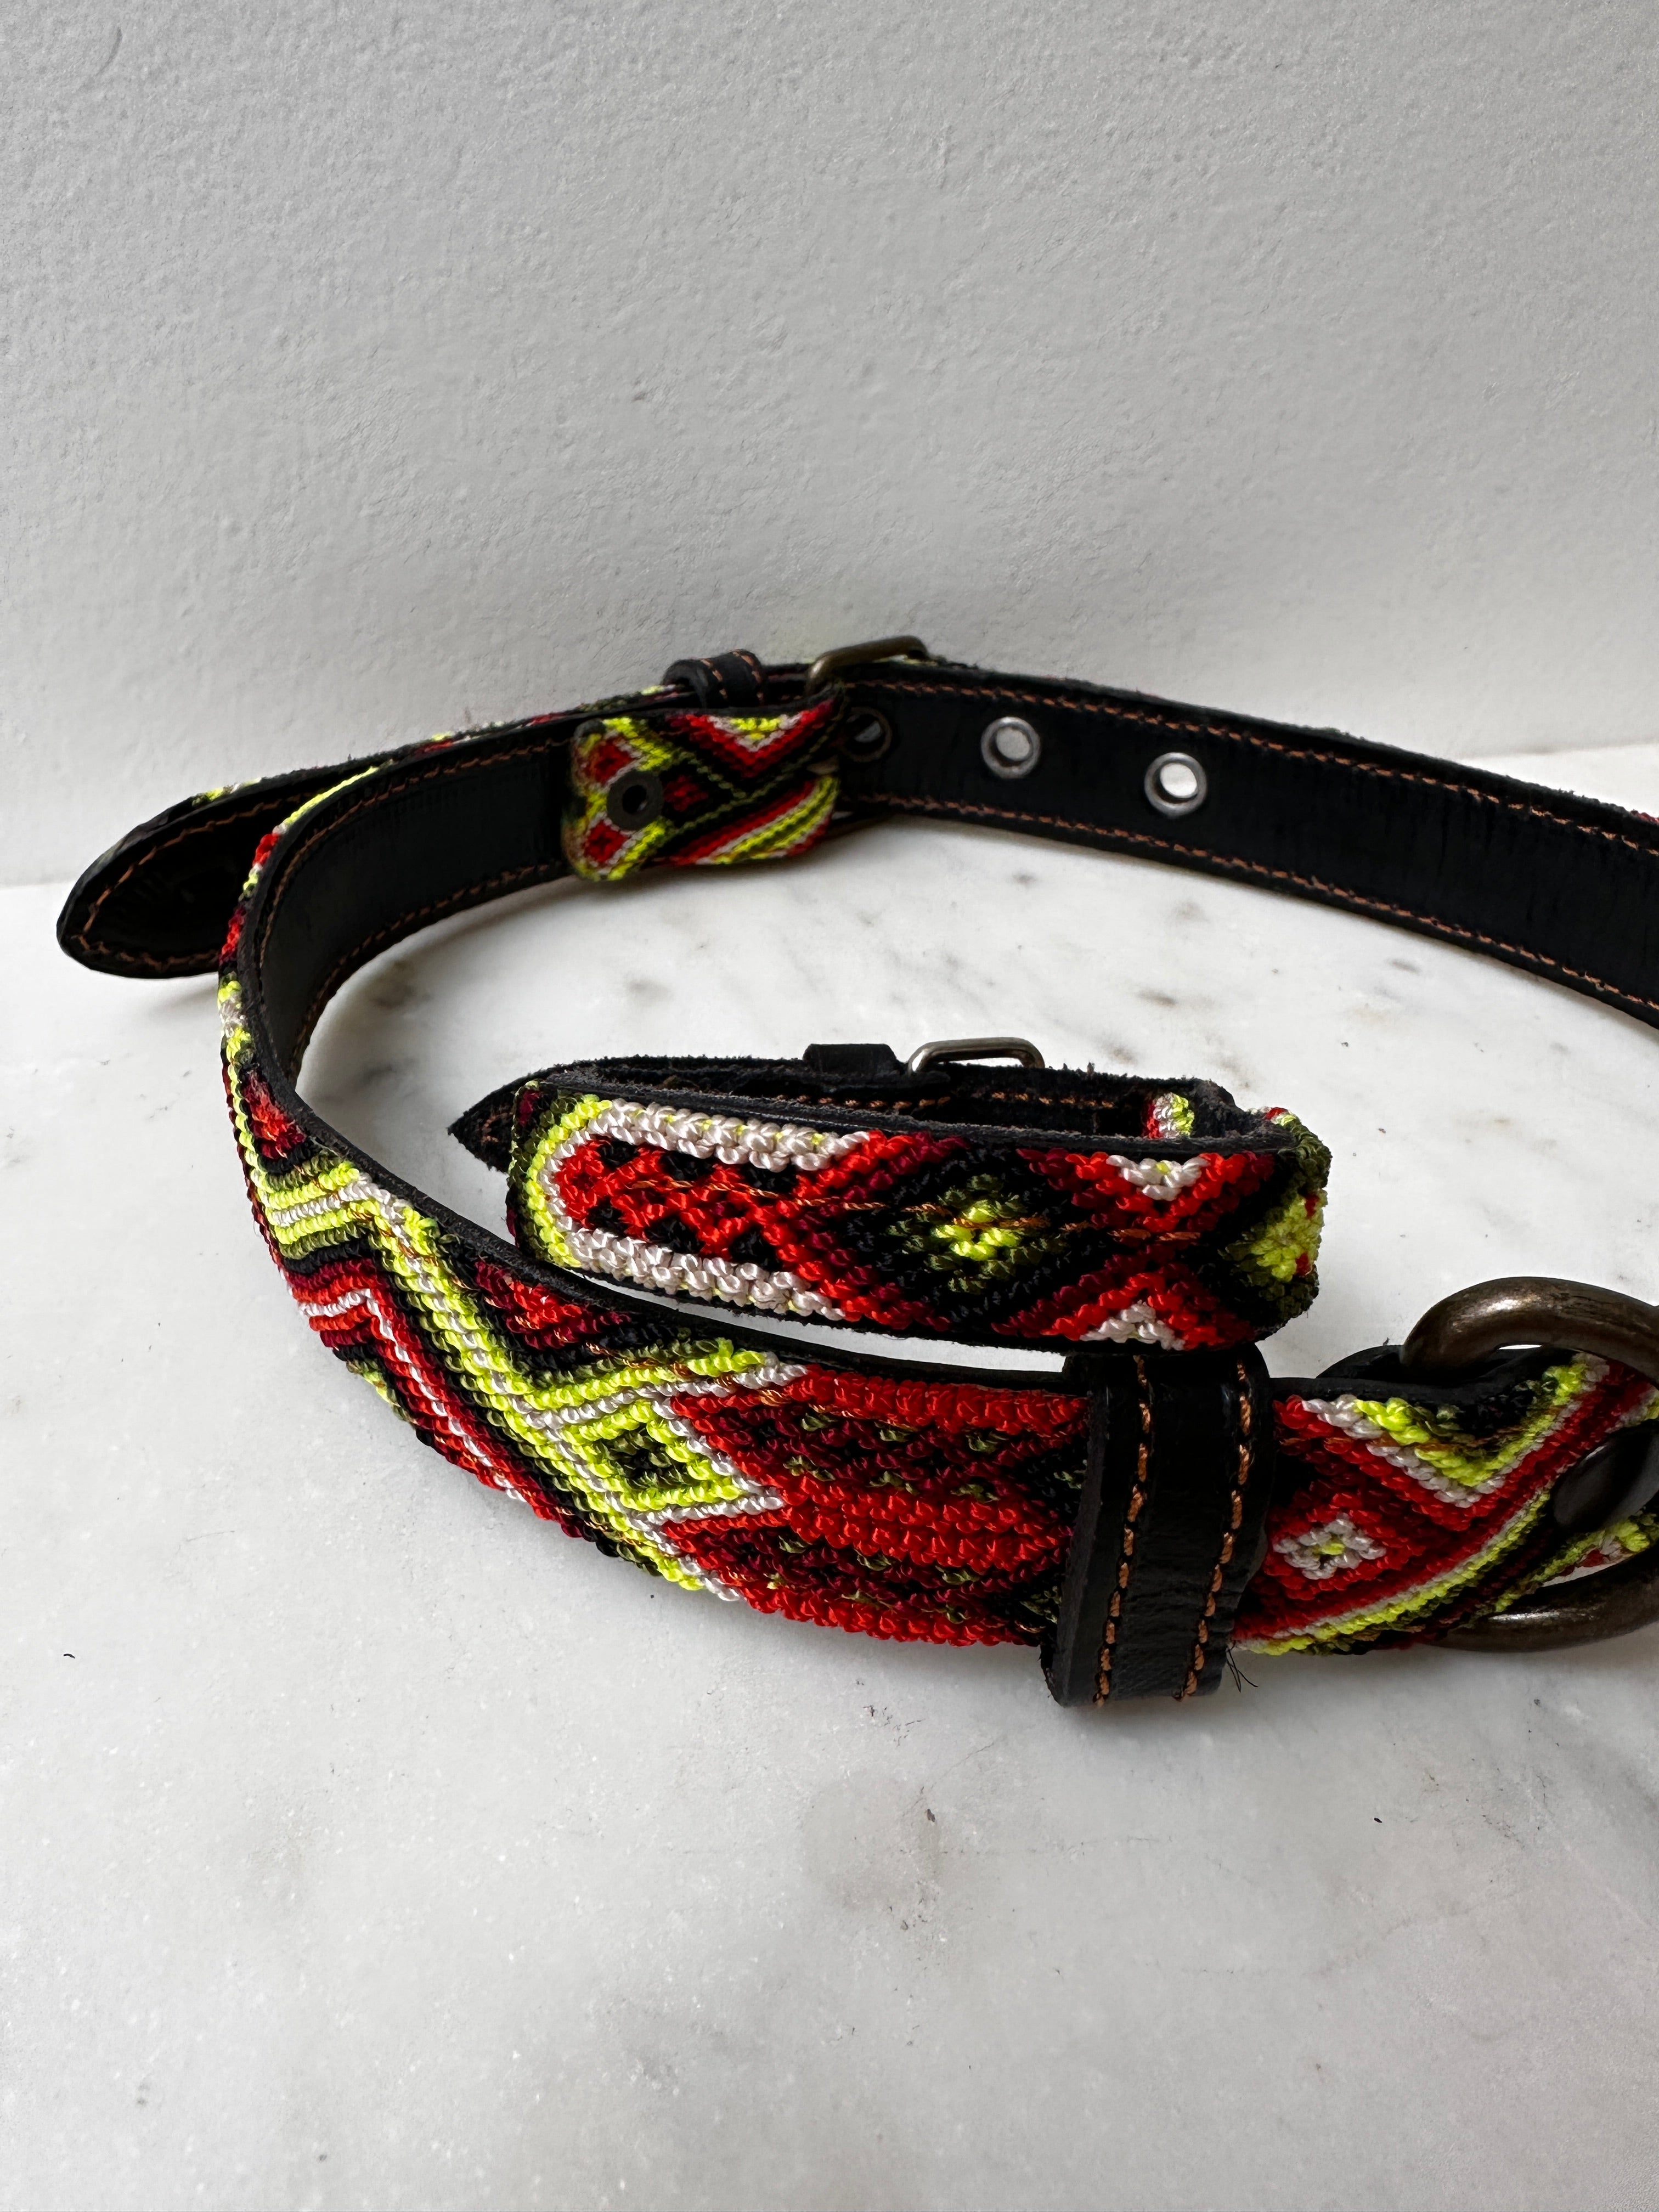 Future Nomads Homewares One Size Huichol Fully Embroidered Dog Collar L9